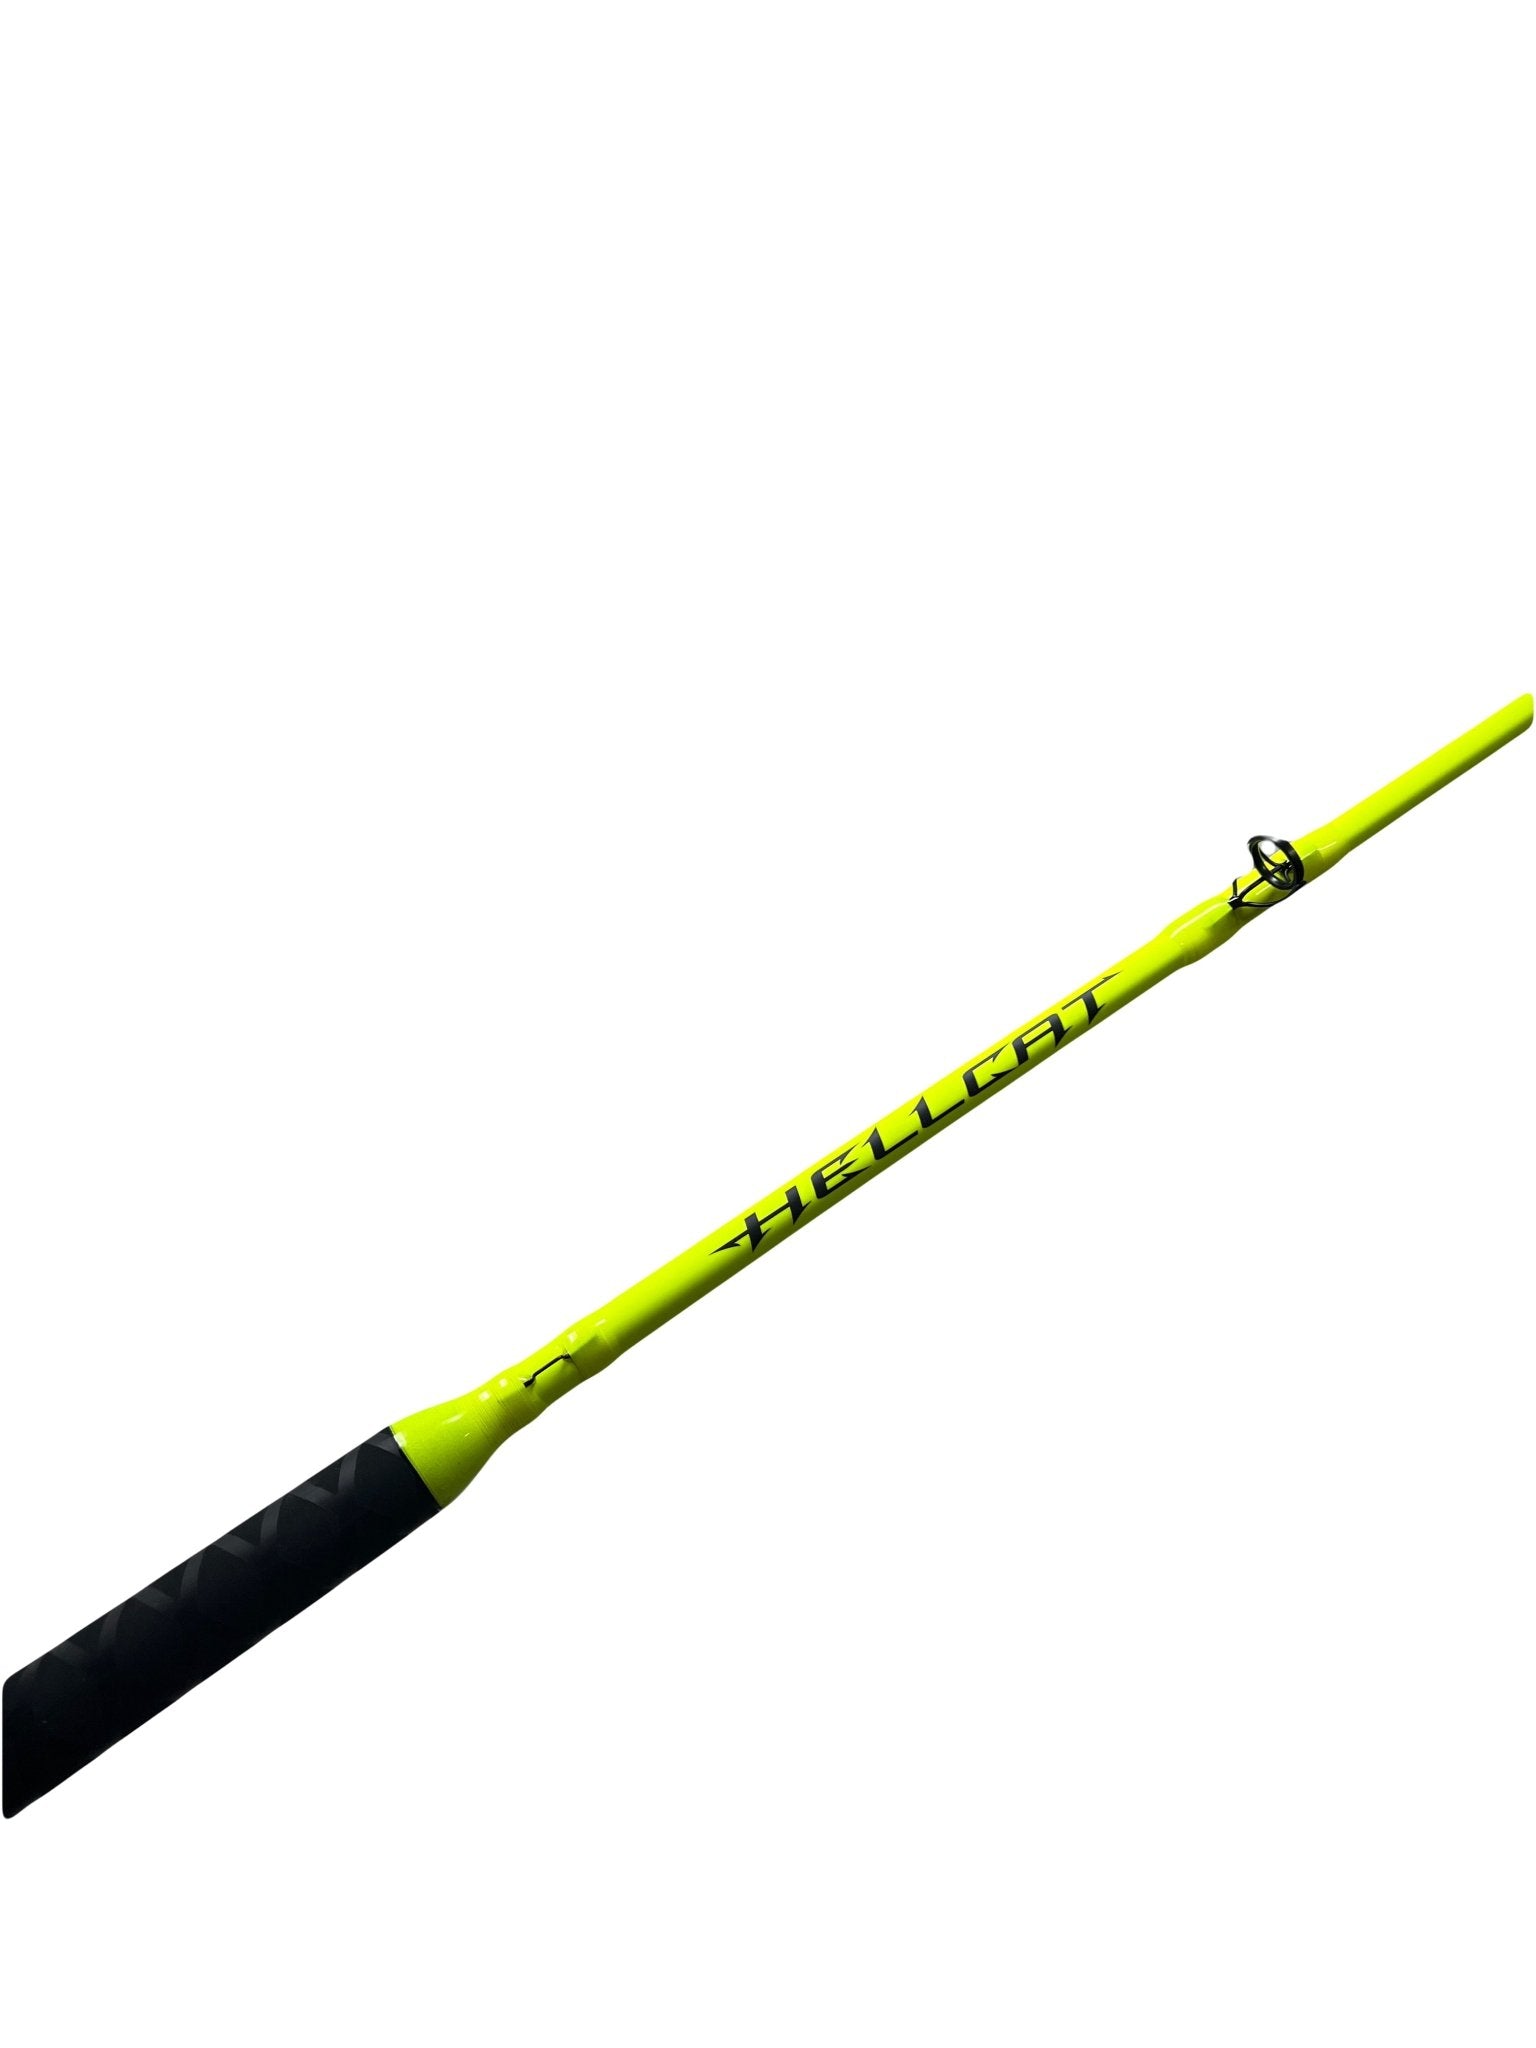 1) - Welcome to Catch The Fever! The NEW Yellow HellCat Rods will be  available for purchase on Friday, September 29th at 7AM EST.